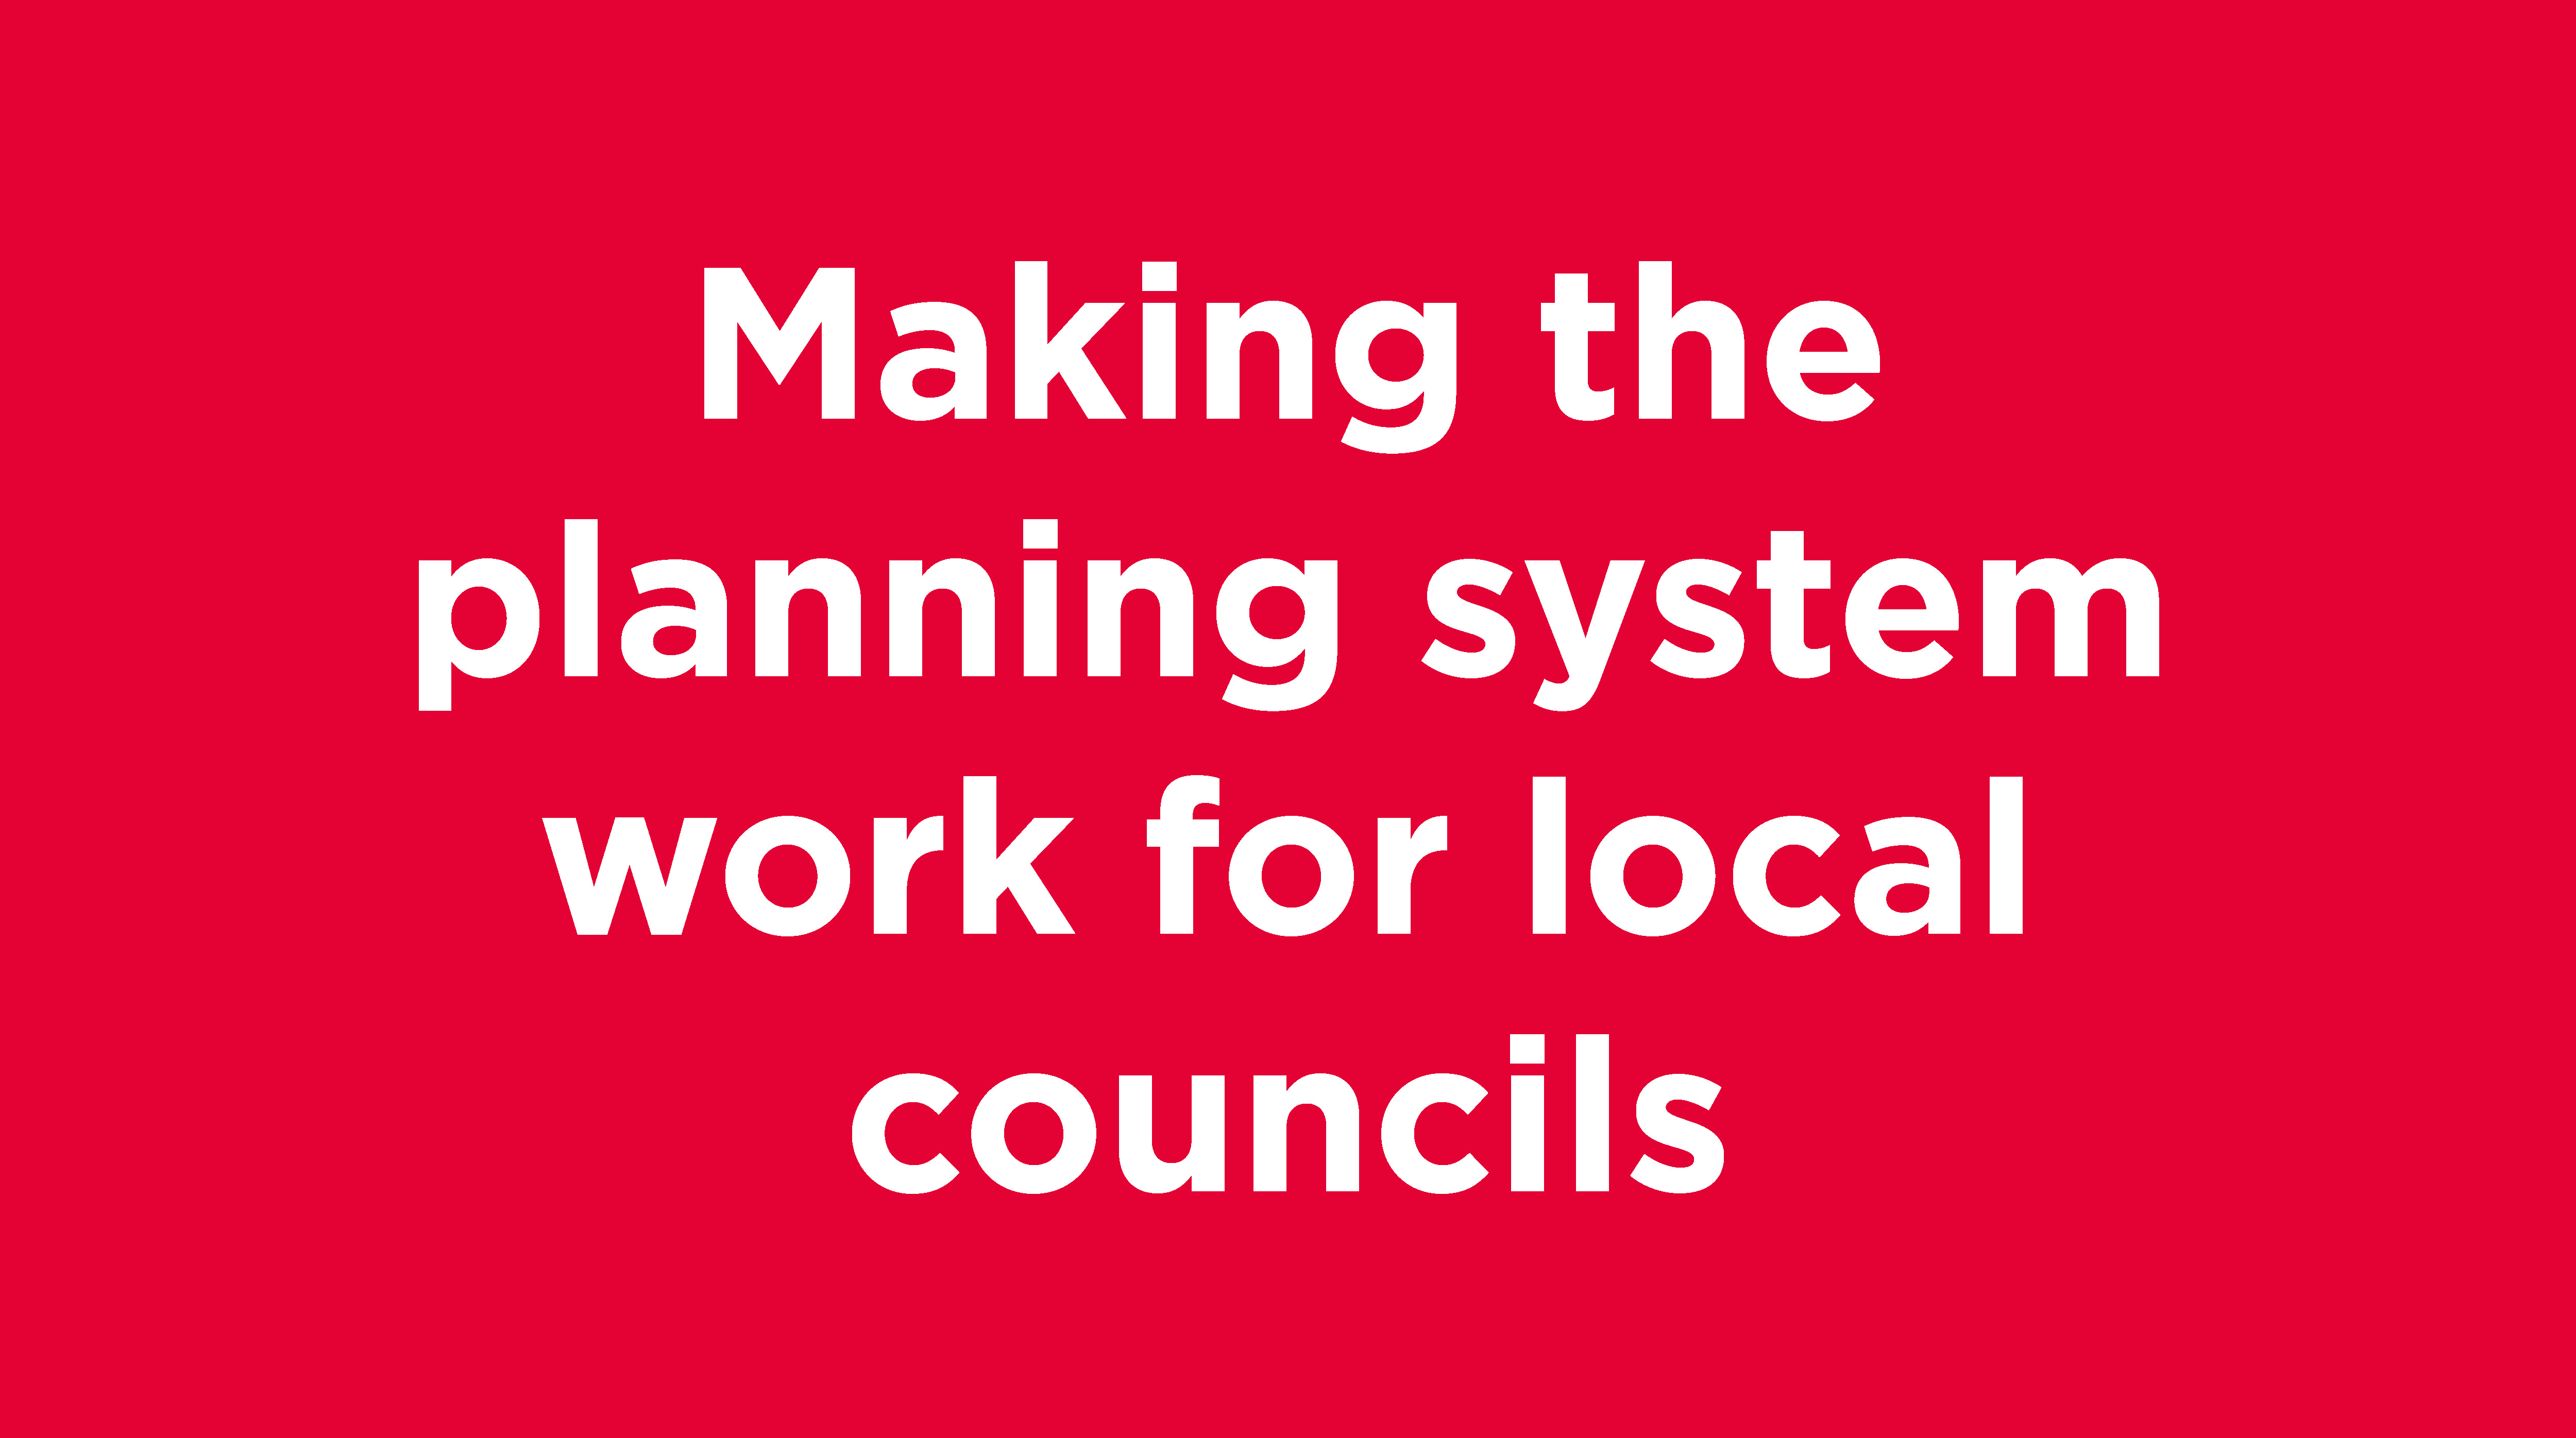 Making-the-planning-system-work-for-local-councils